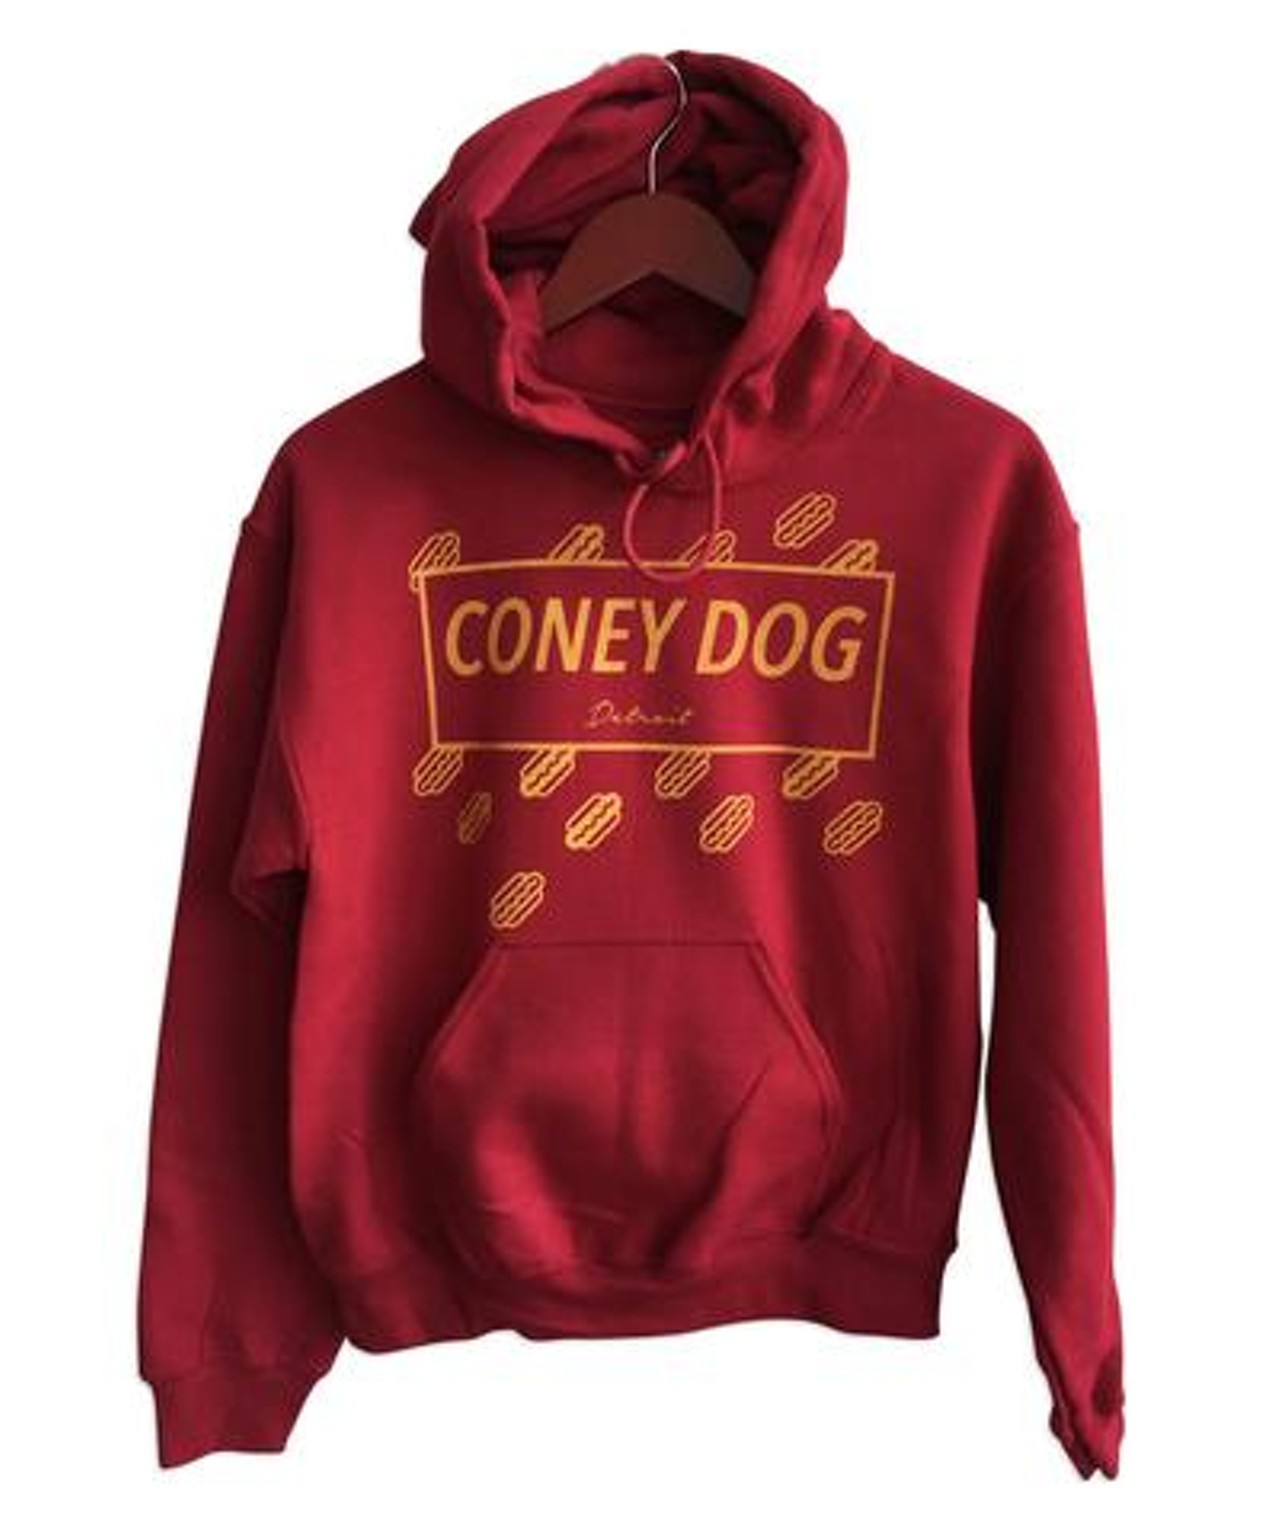 Coney Dog Party unisex pullover hoodie, $39.